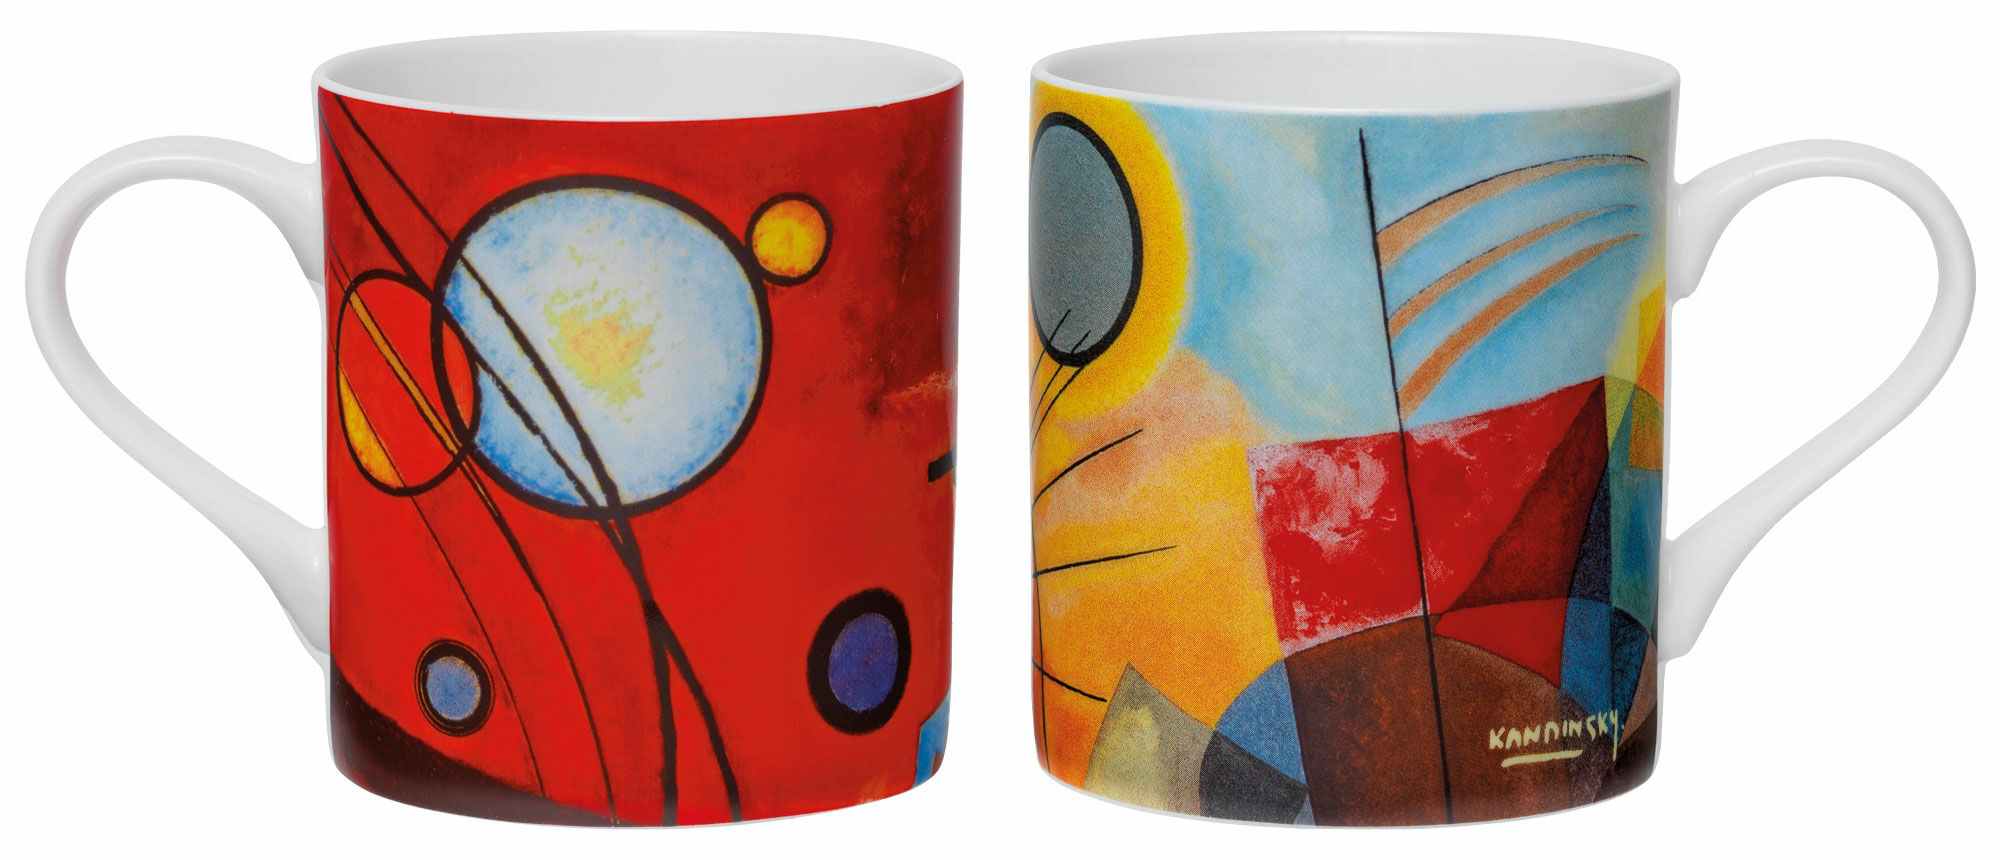 Set of 2 mugs "Heavy Red" and "Yellow - Red - Blue", porcelain by Wassily Kandinsky